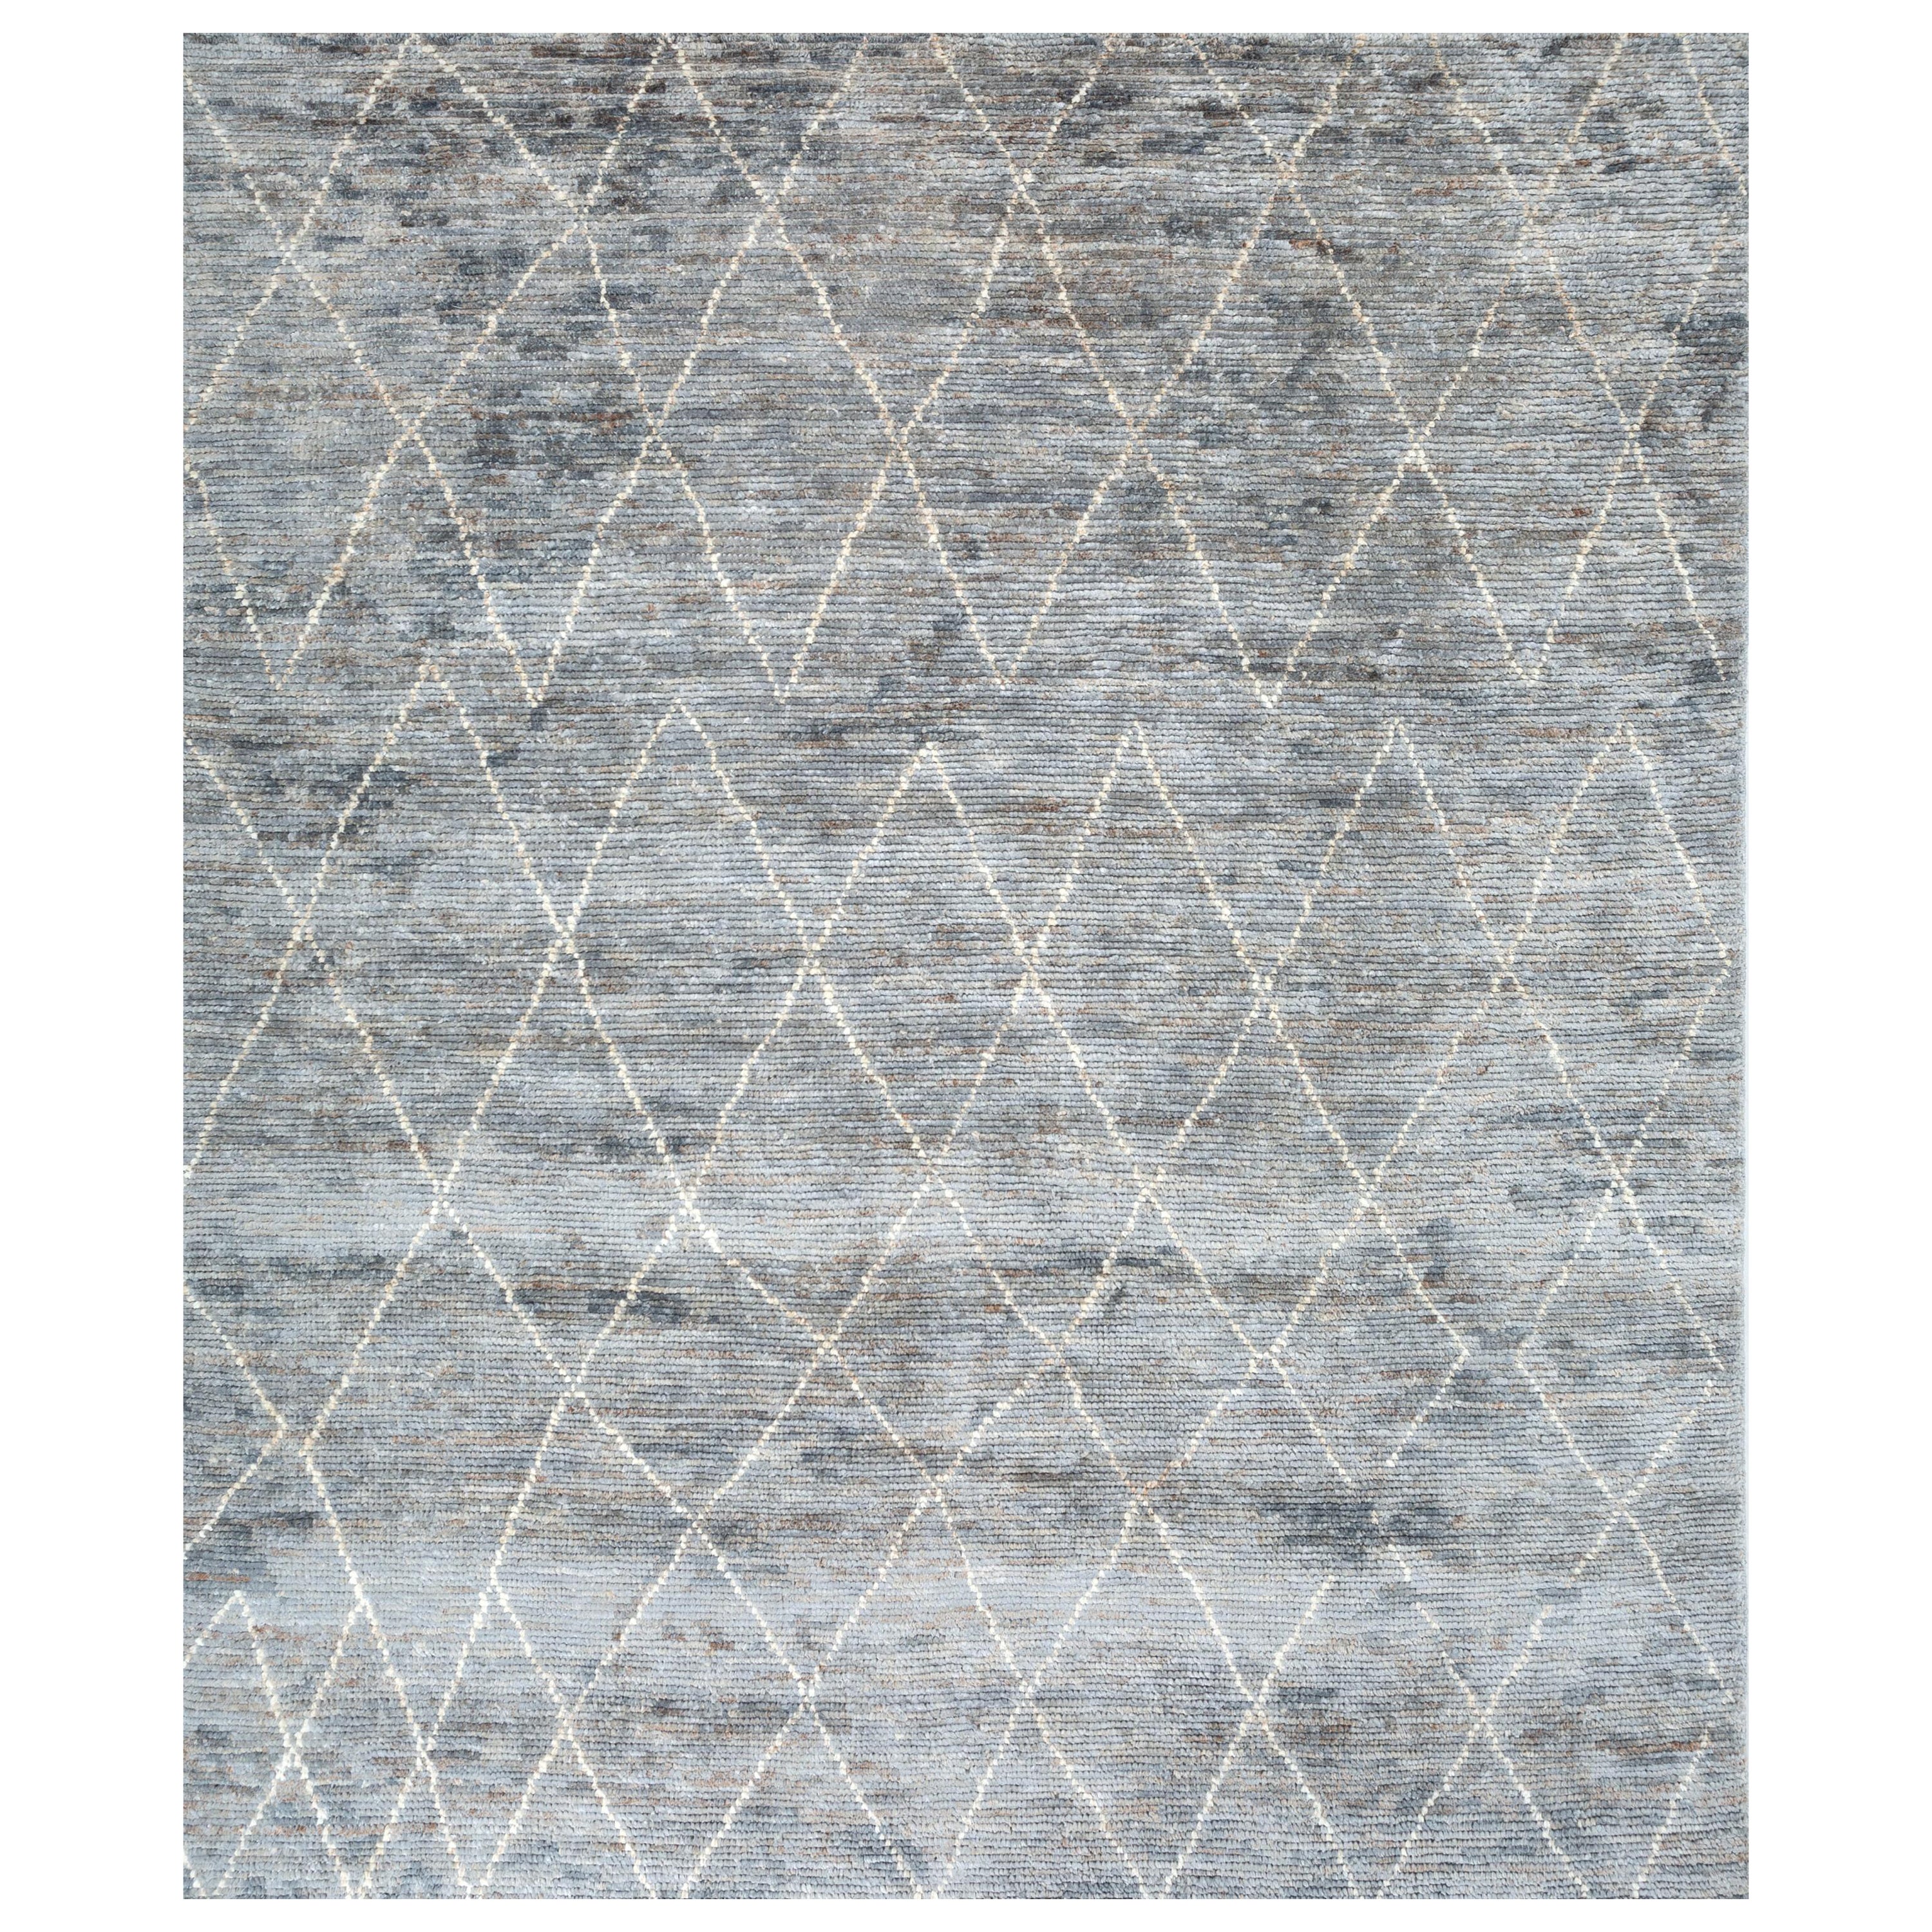 Cultural Mosaic Glacier Gray & White 240X300 cm Hand-Knotted Rug